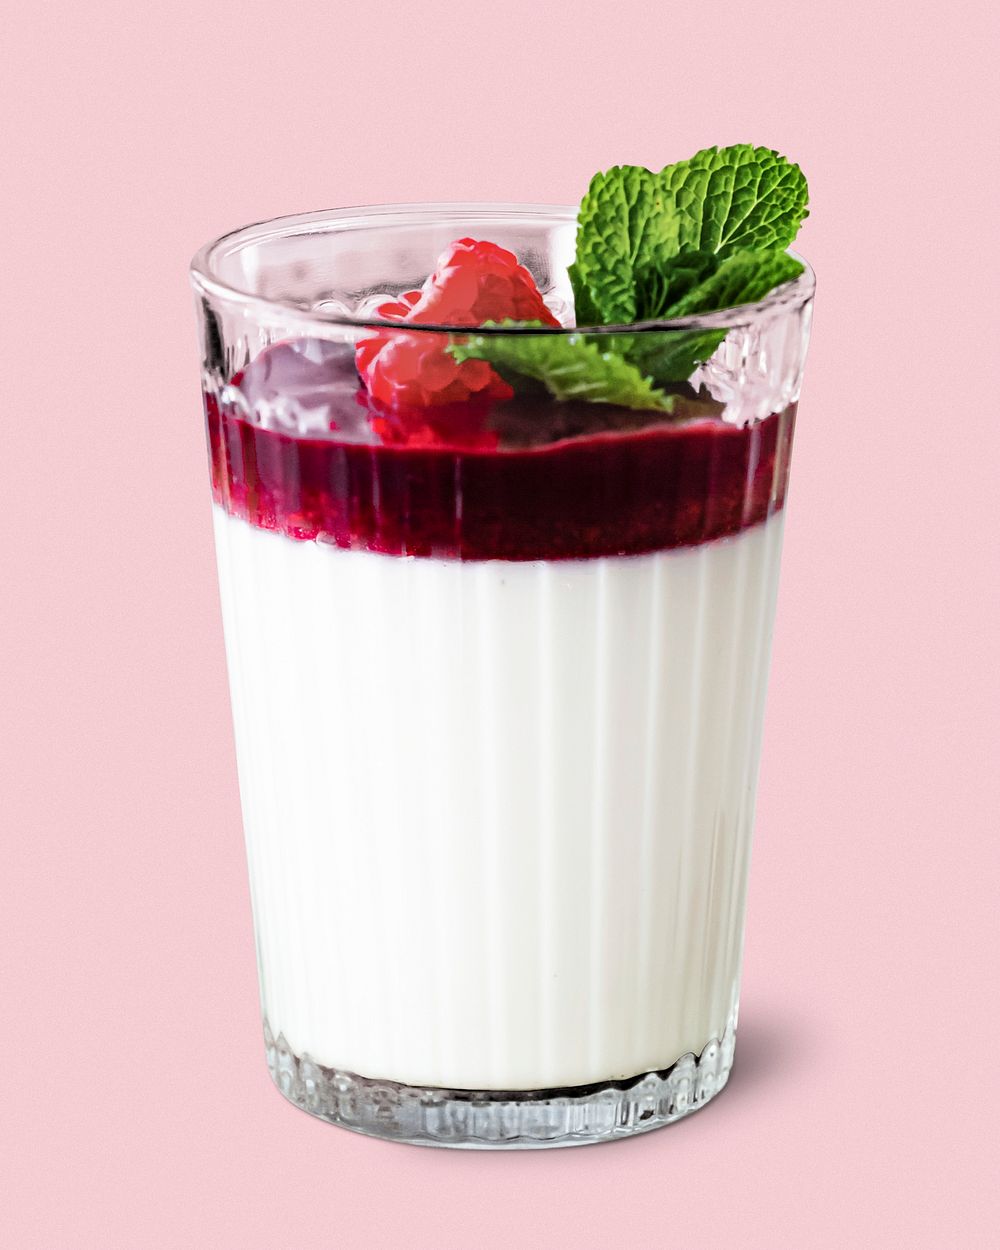 Vanilla panna cotta with raspberry served in a glass